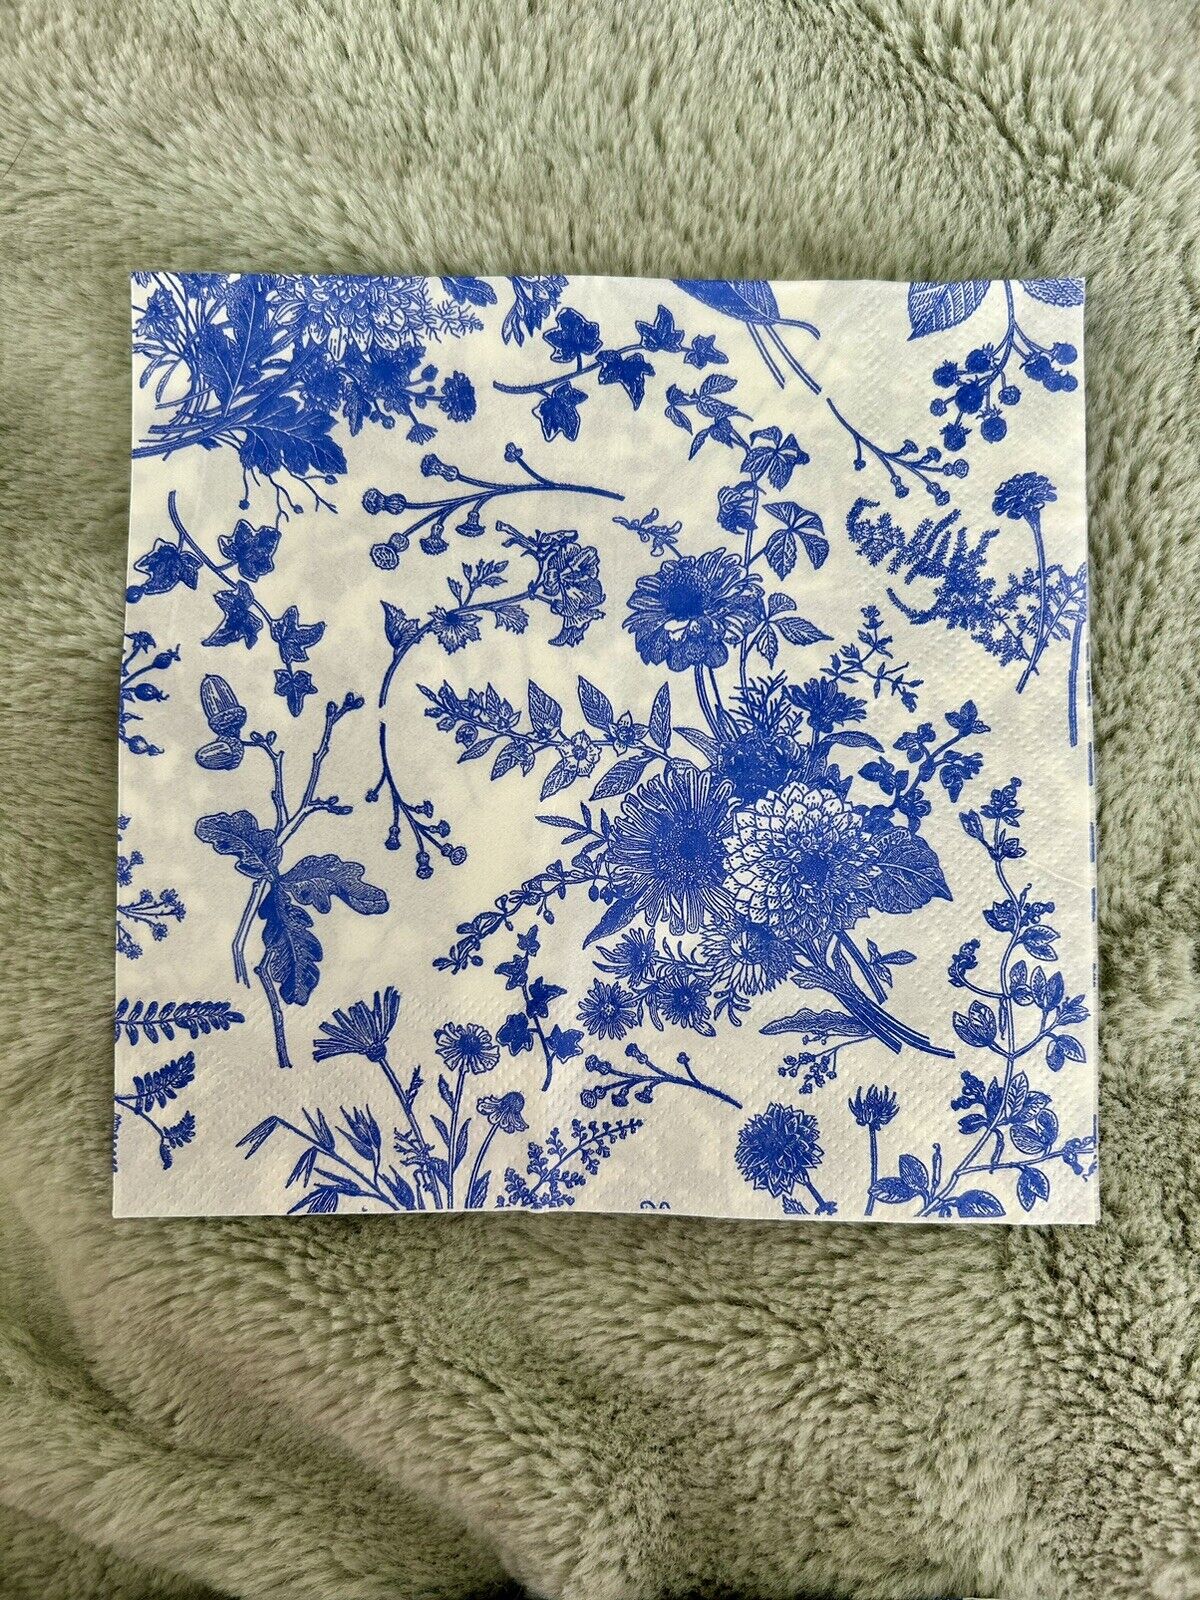 2 Blue And White Floral Paper Napkins.